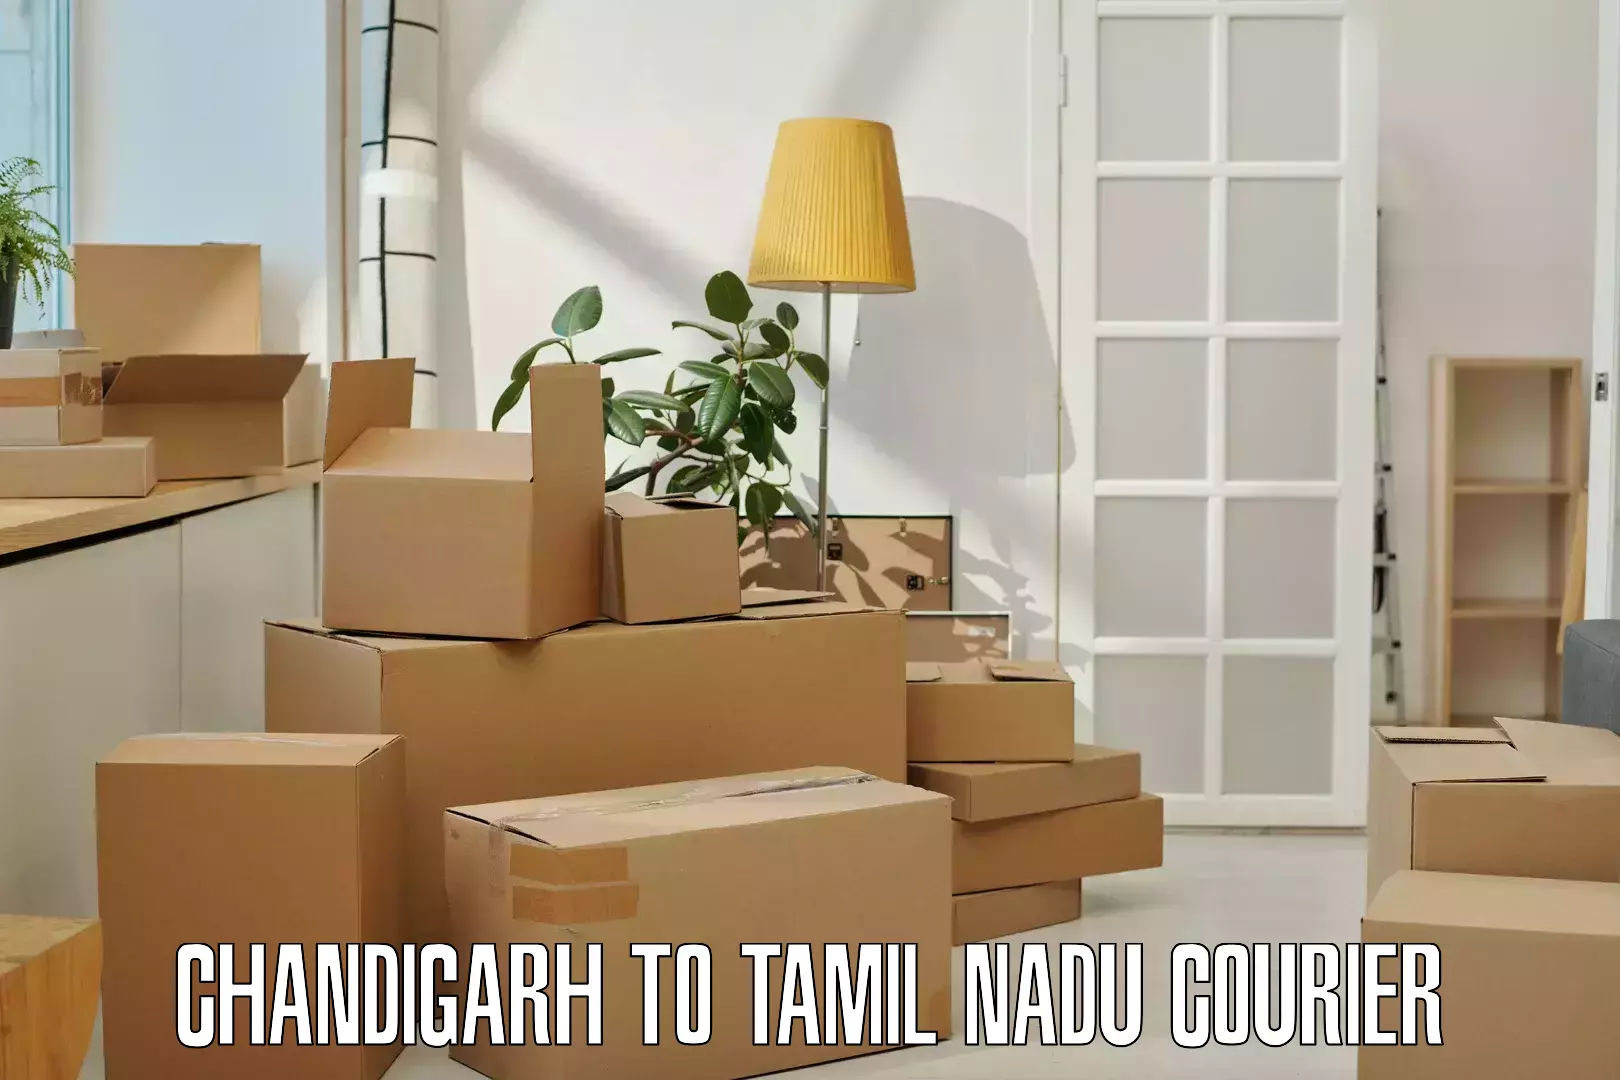 Cost-effective courier options Chandigarh to Vilathikulam